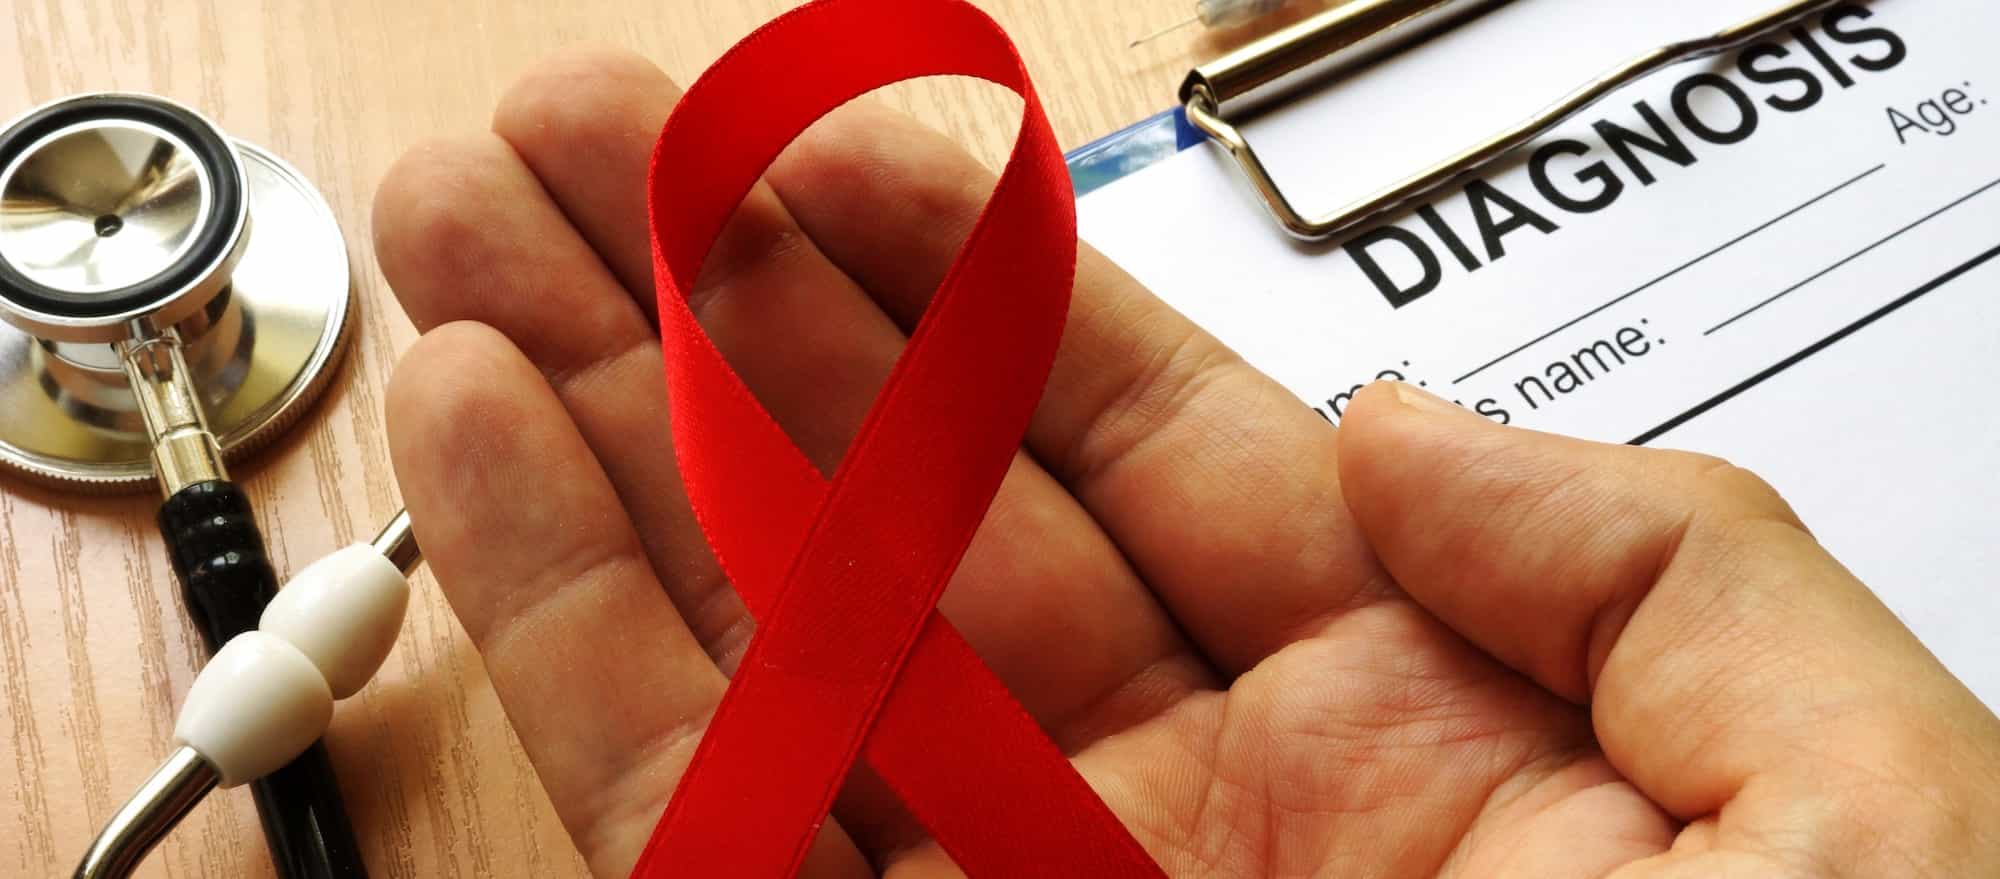 Human Dignity in the Islamic Bioethical Discourse on HIV/AIDS by Sheikh Farouq Fareez